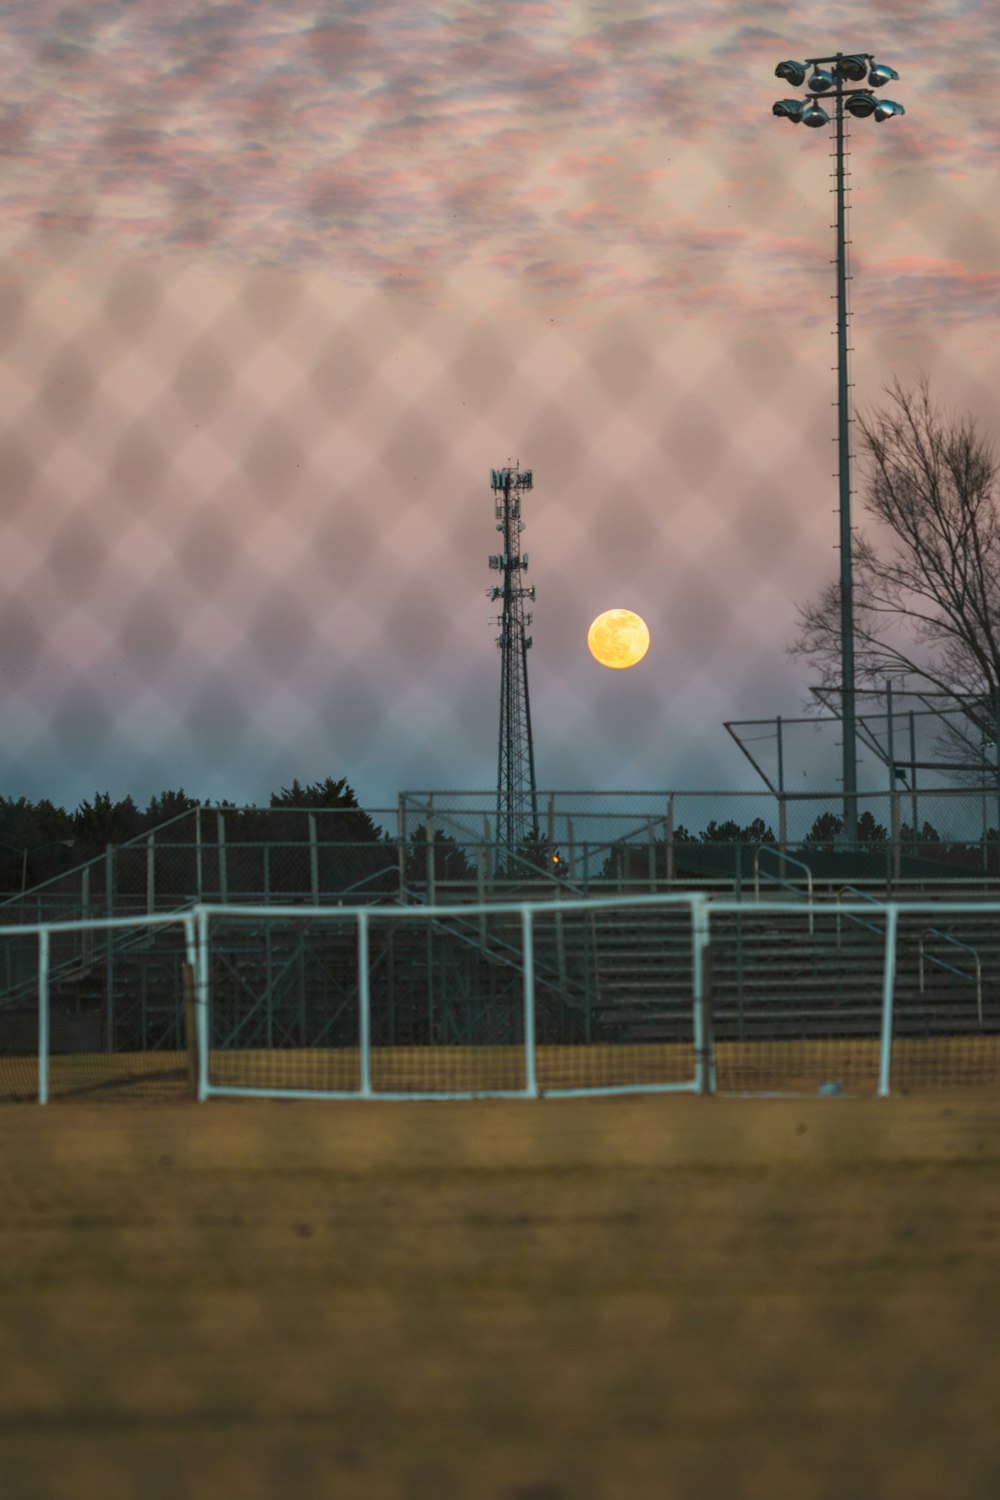 a full moon is seen behind a fence